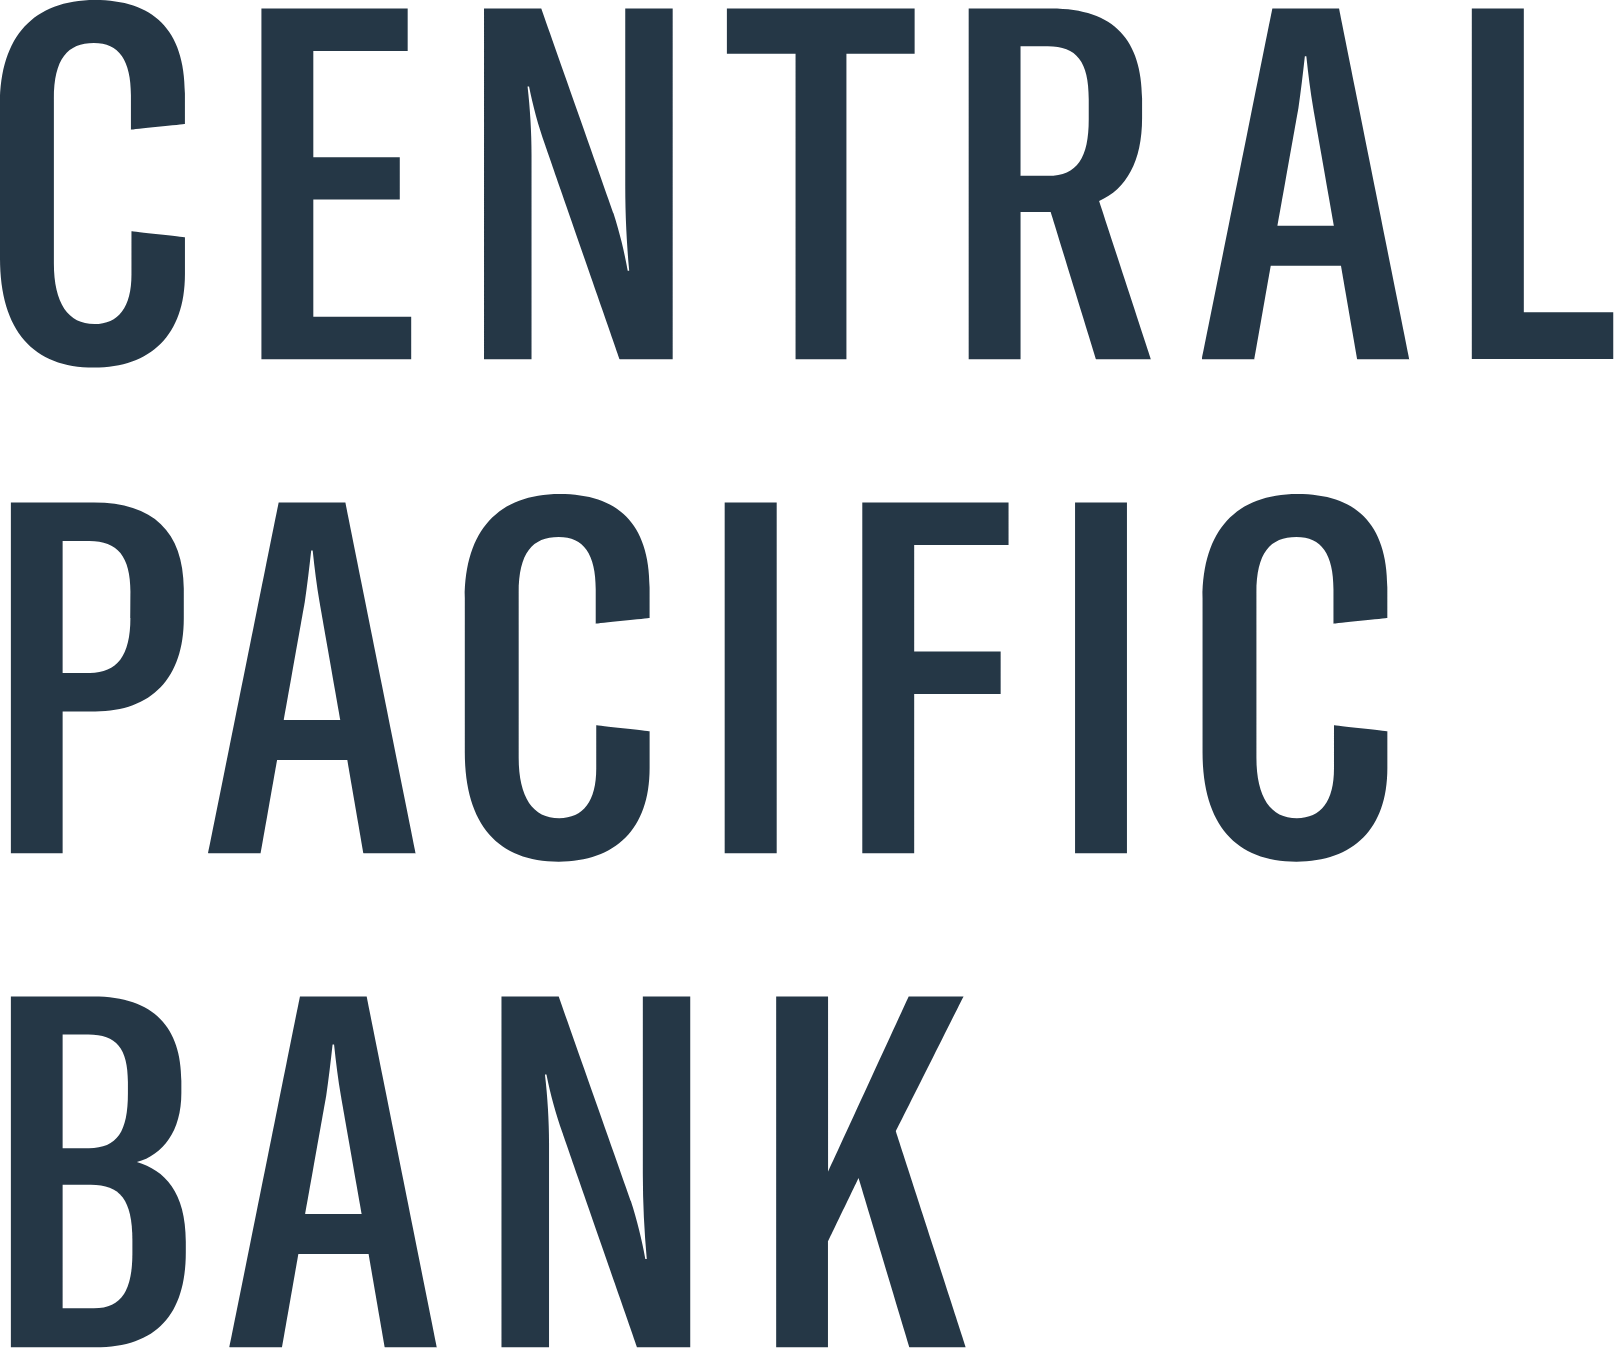 Central Pacific Financial logo large (transparent PNG)